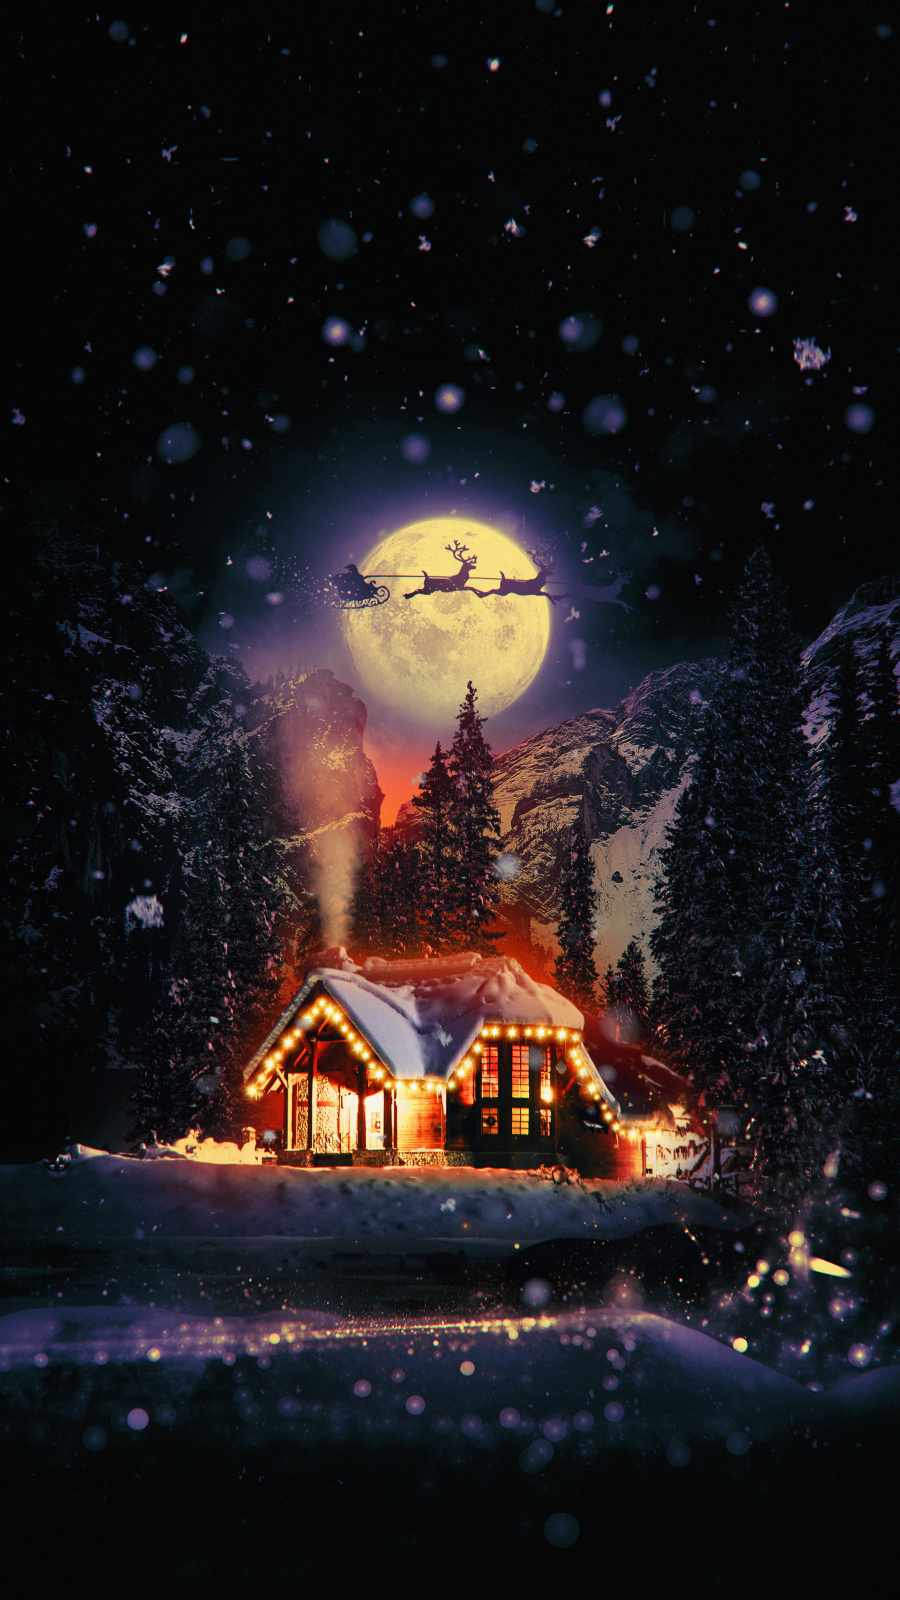 Christmas Home IPhone Wallpaper - IPhone Wallpapers : iPhone Wallpapers